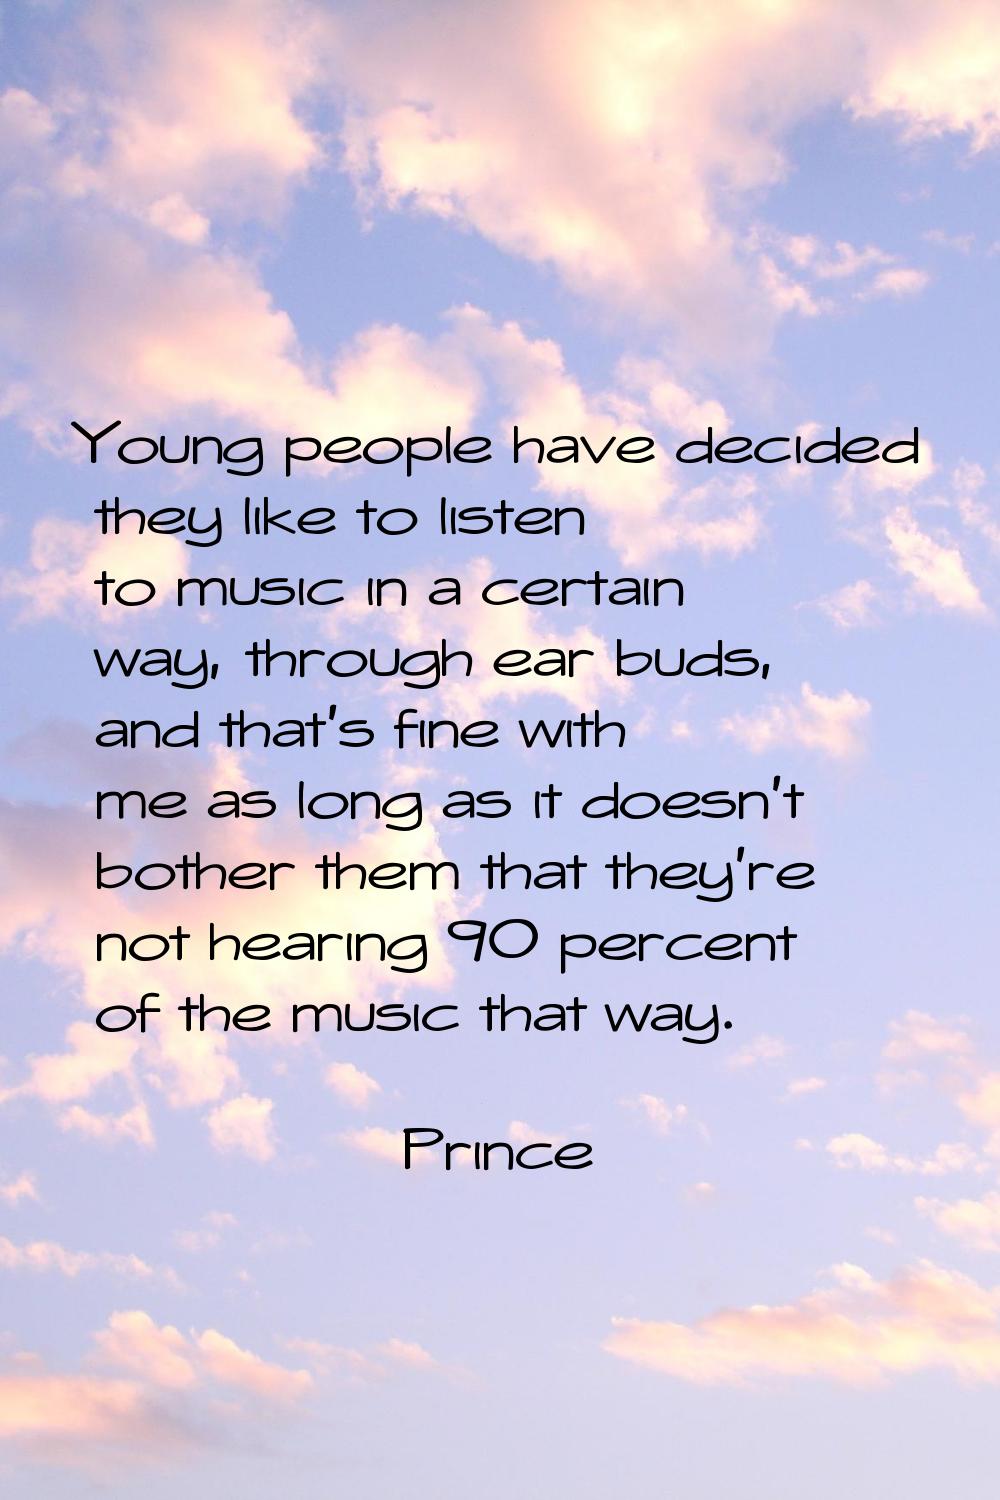 Young people have decided they like to listen to music in a certain way, through ear buds, and that